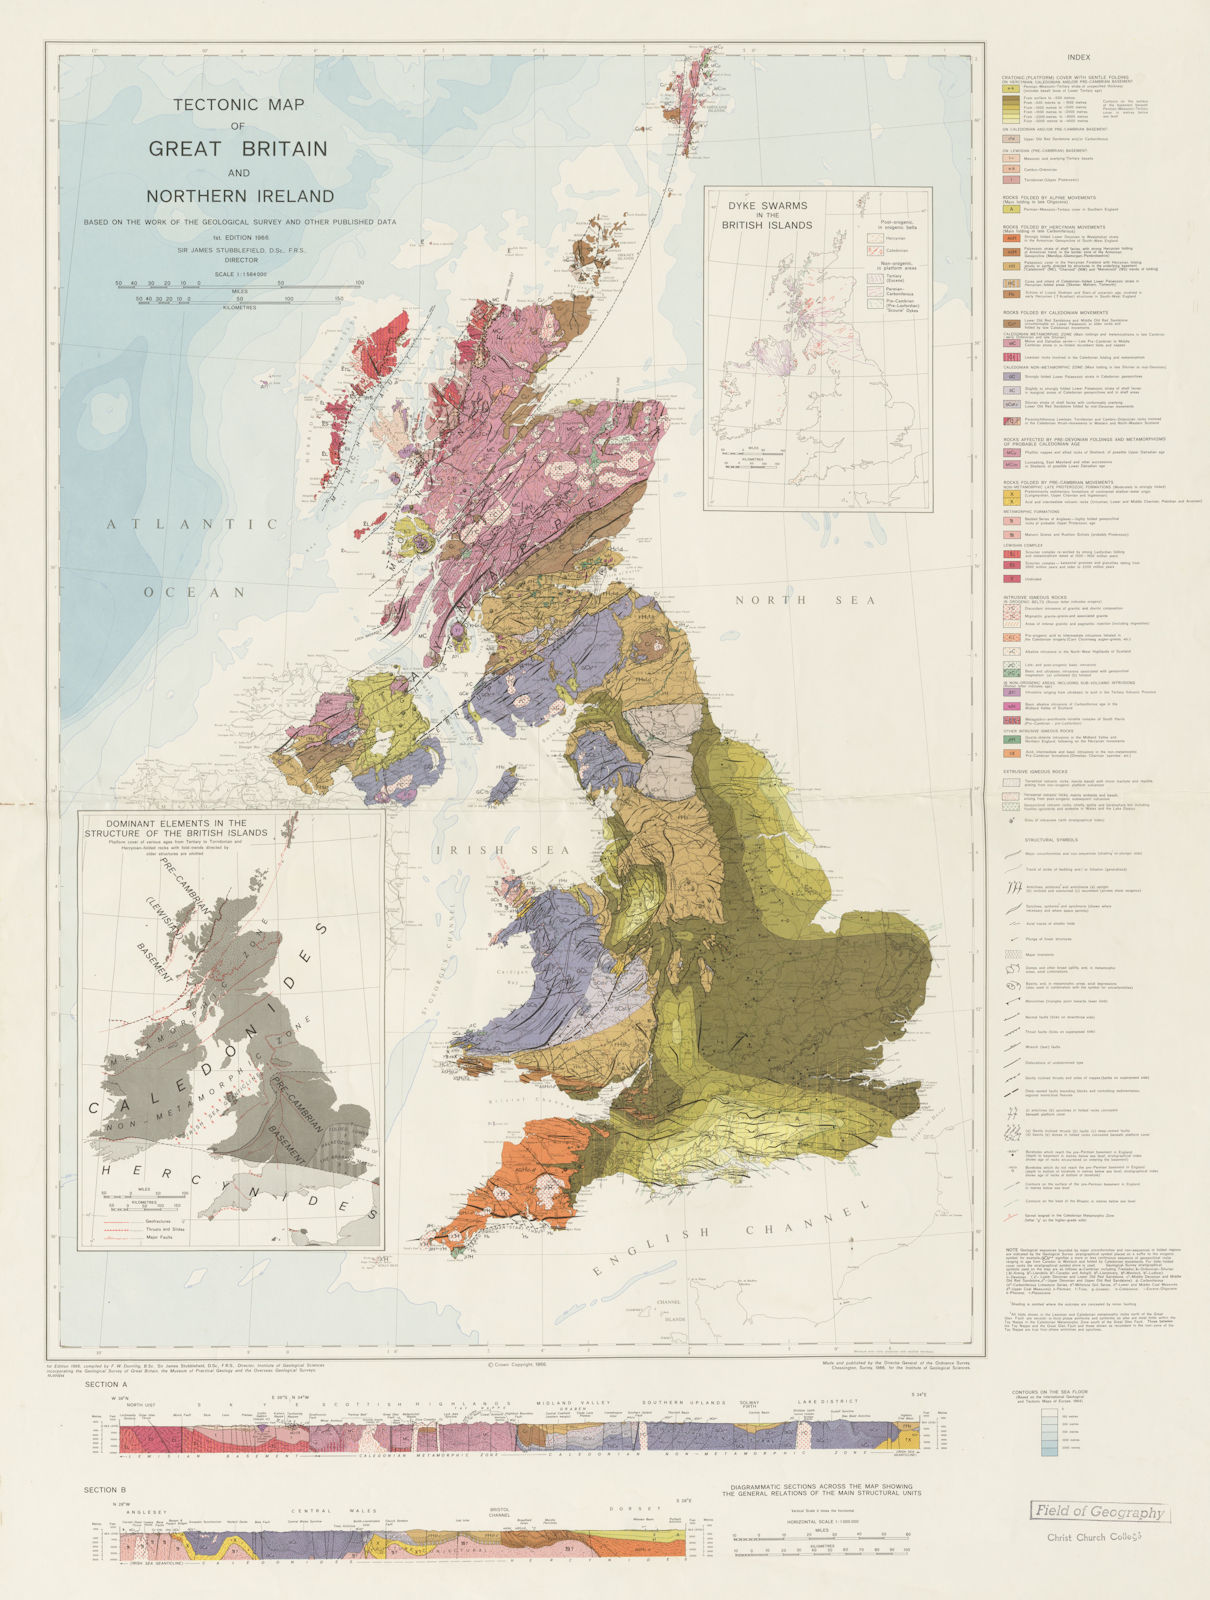 Tectonic map of Great Britain and Northern Ireland. Geological survey 1966